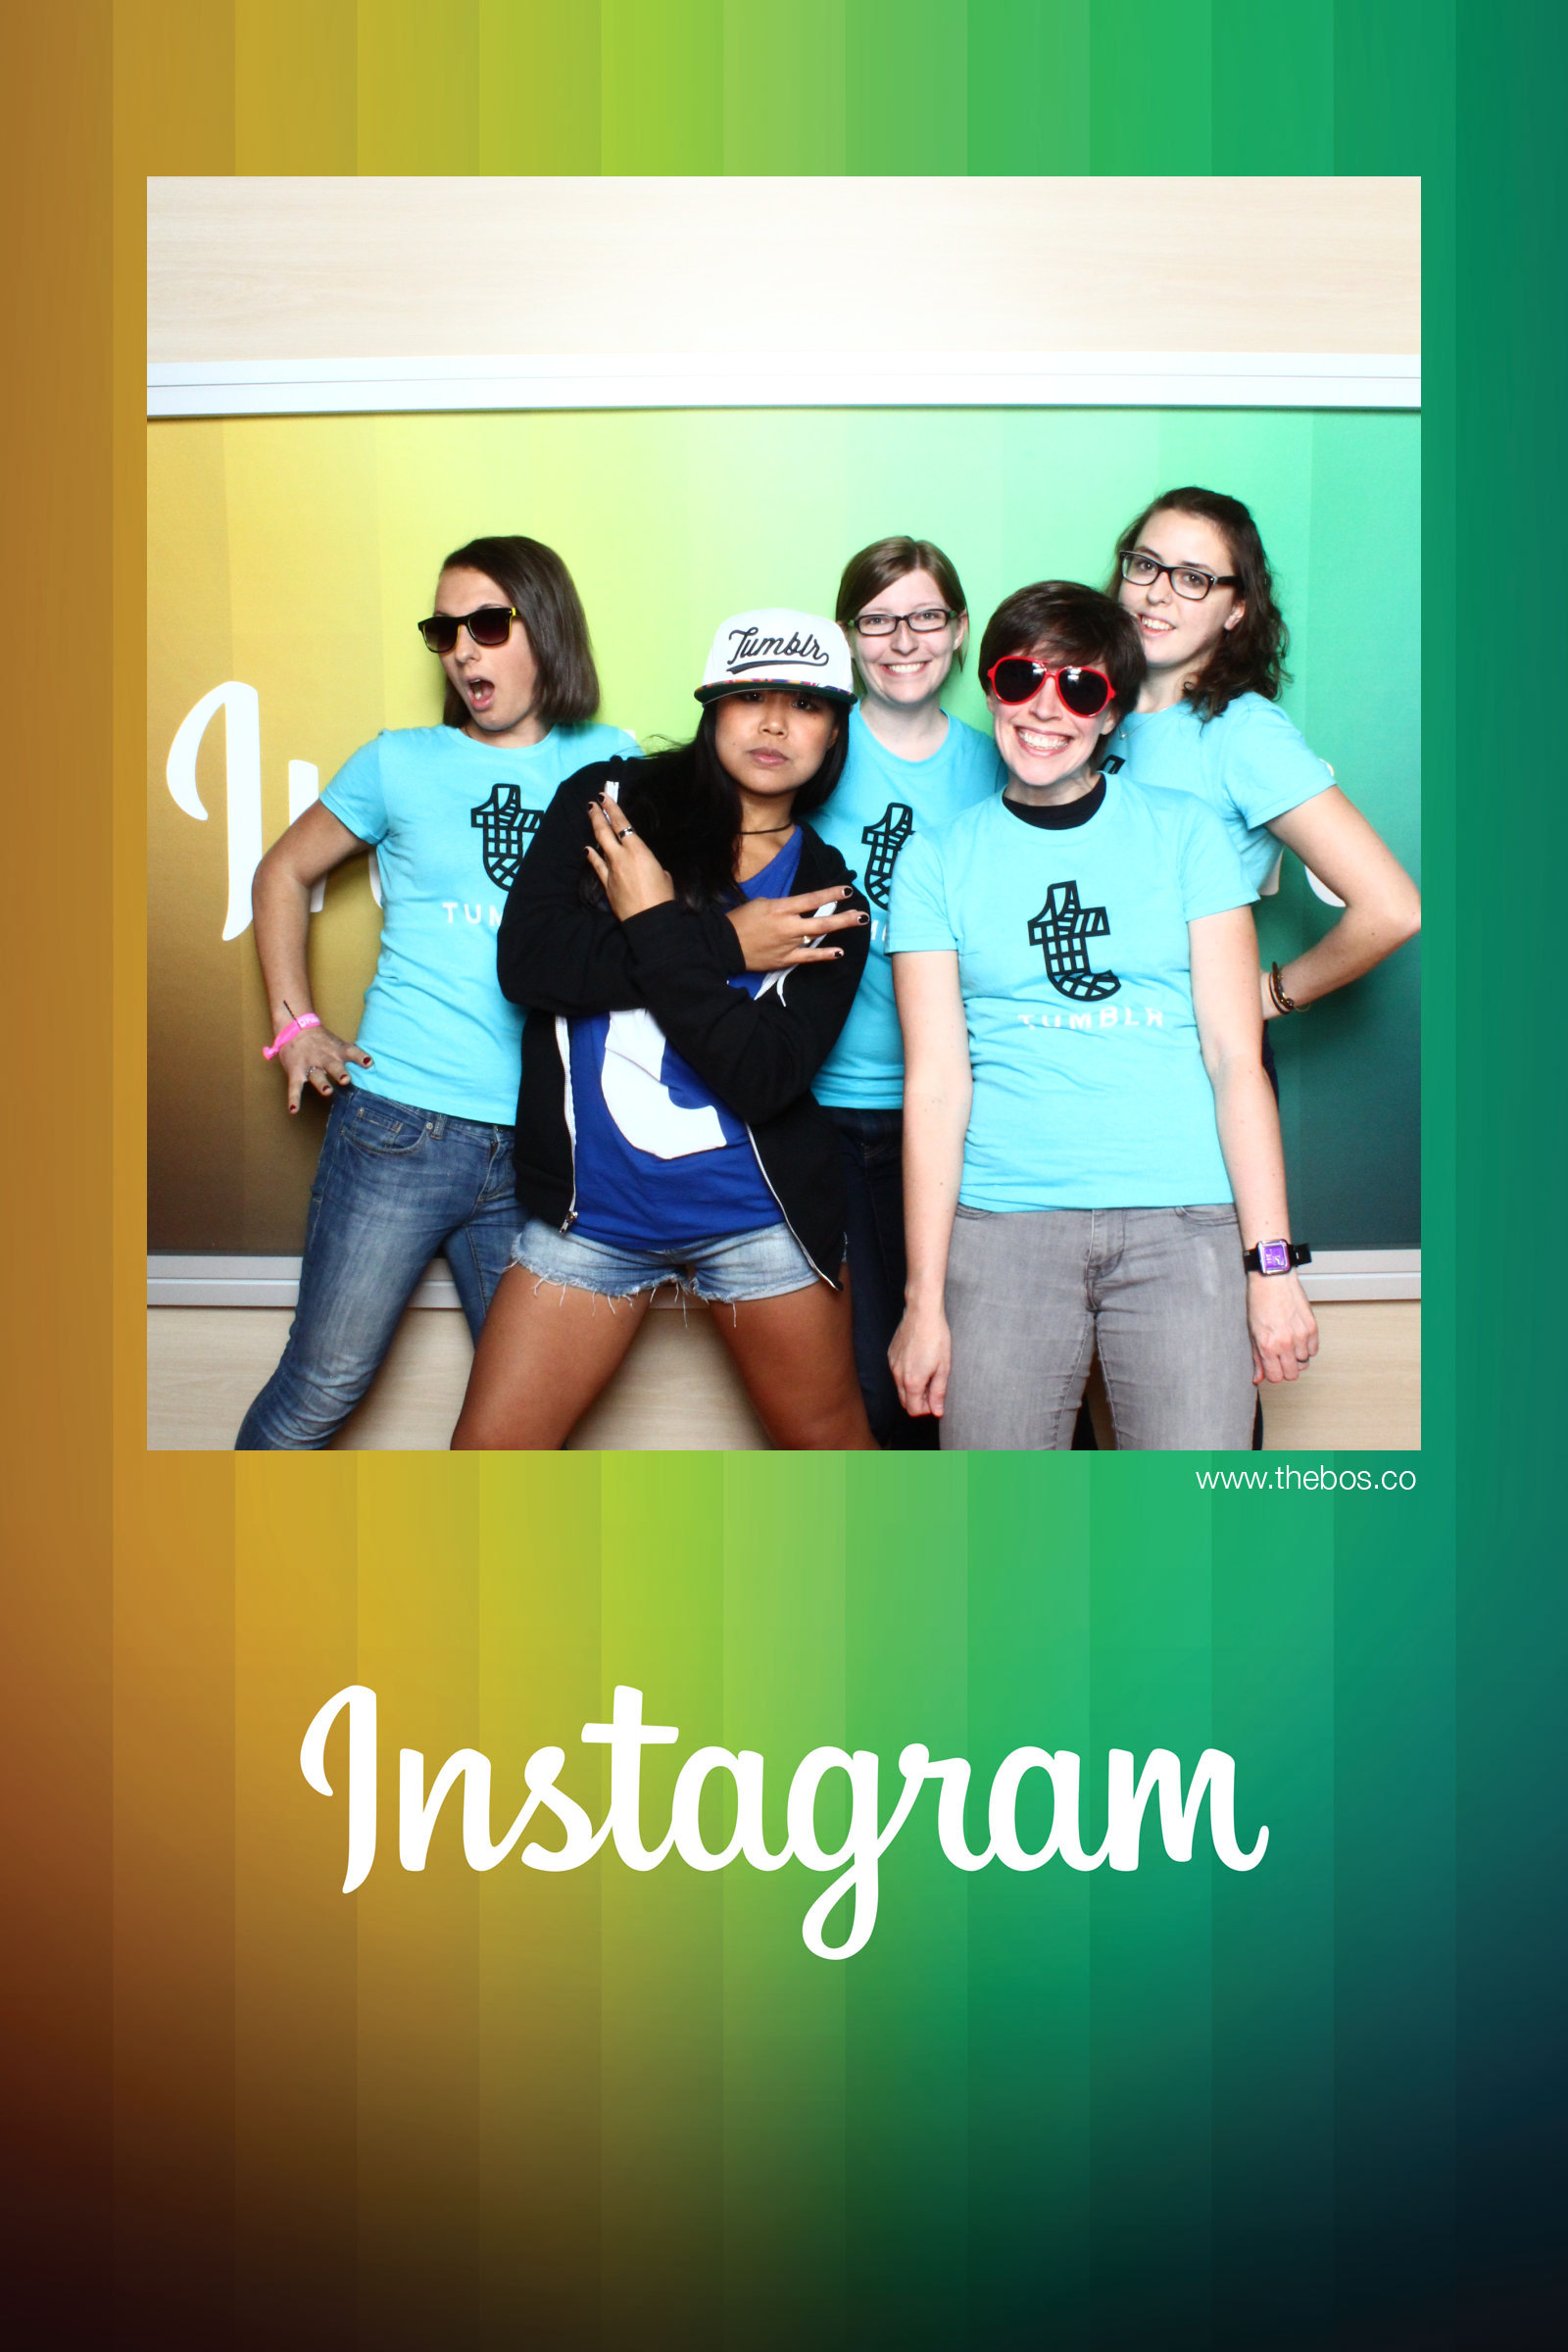 Tumblr ladies invading the Instagram booth at the Grace Hopper Celebration!